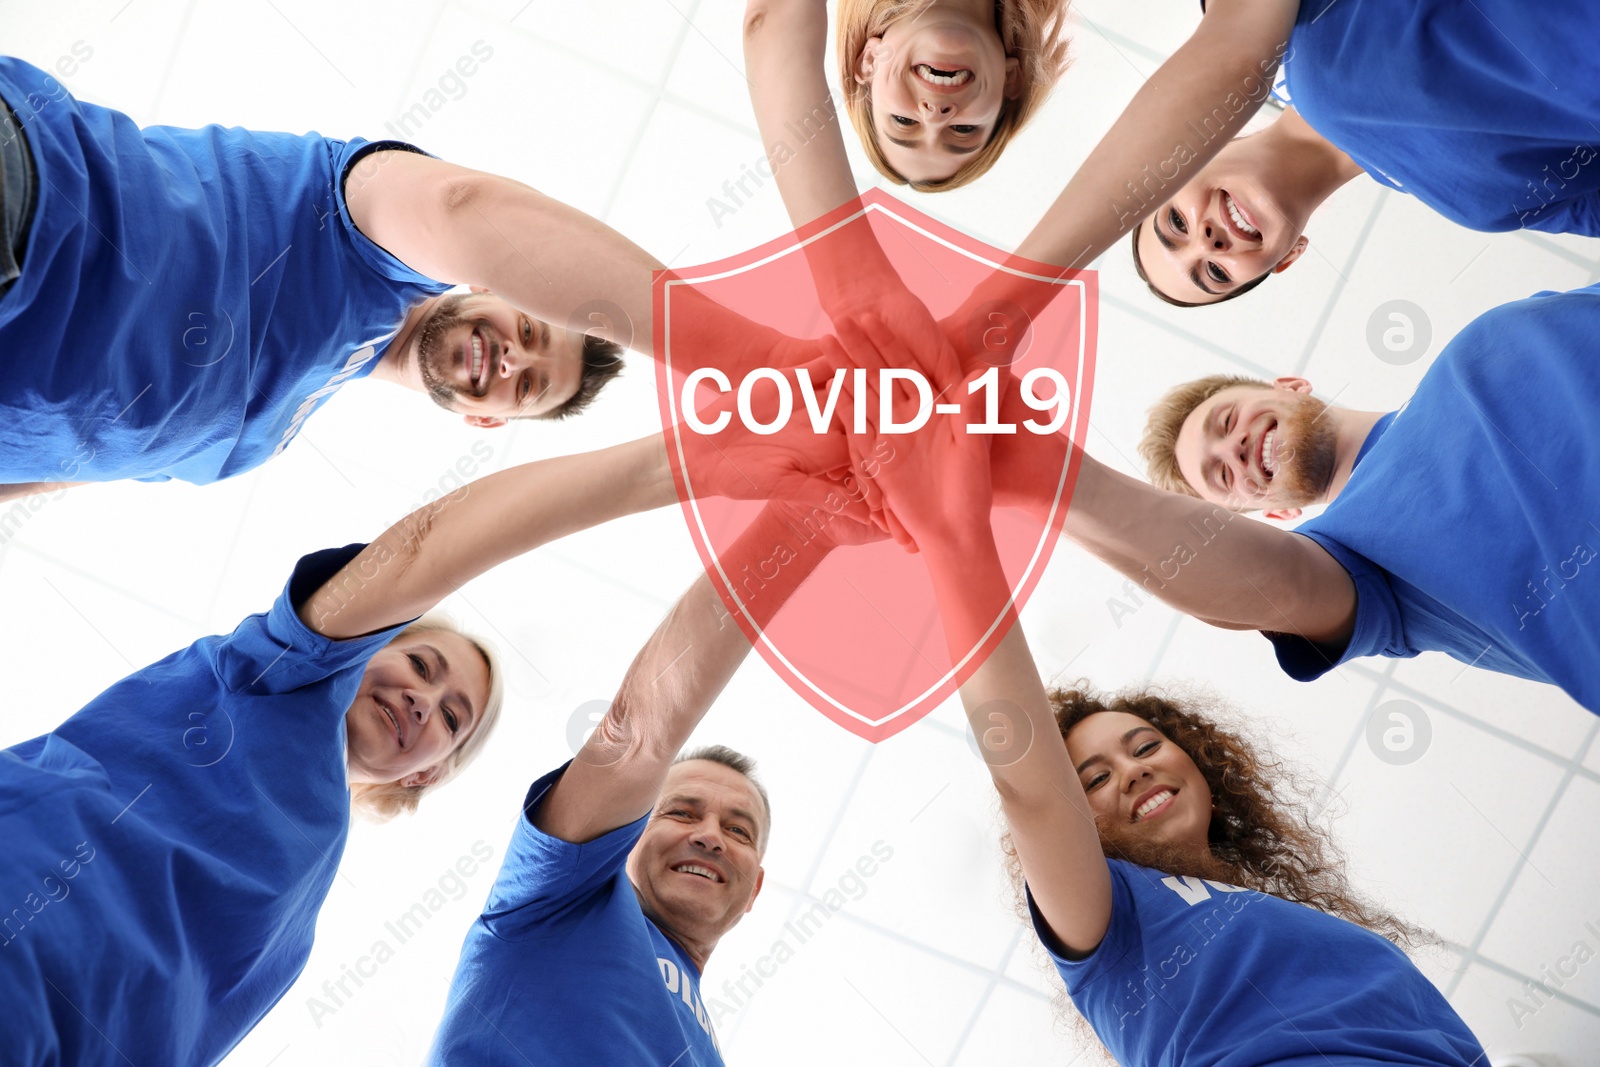 Image of Volunteers uniting to help during COVID-19 outbreak. Group of people holding hands together on light background, shield illustration